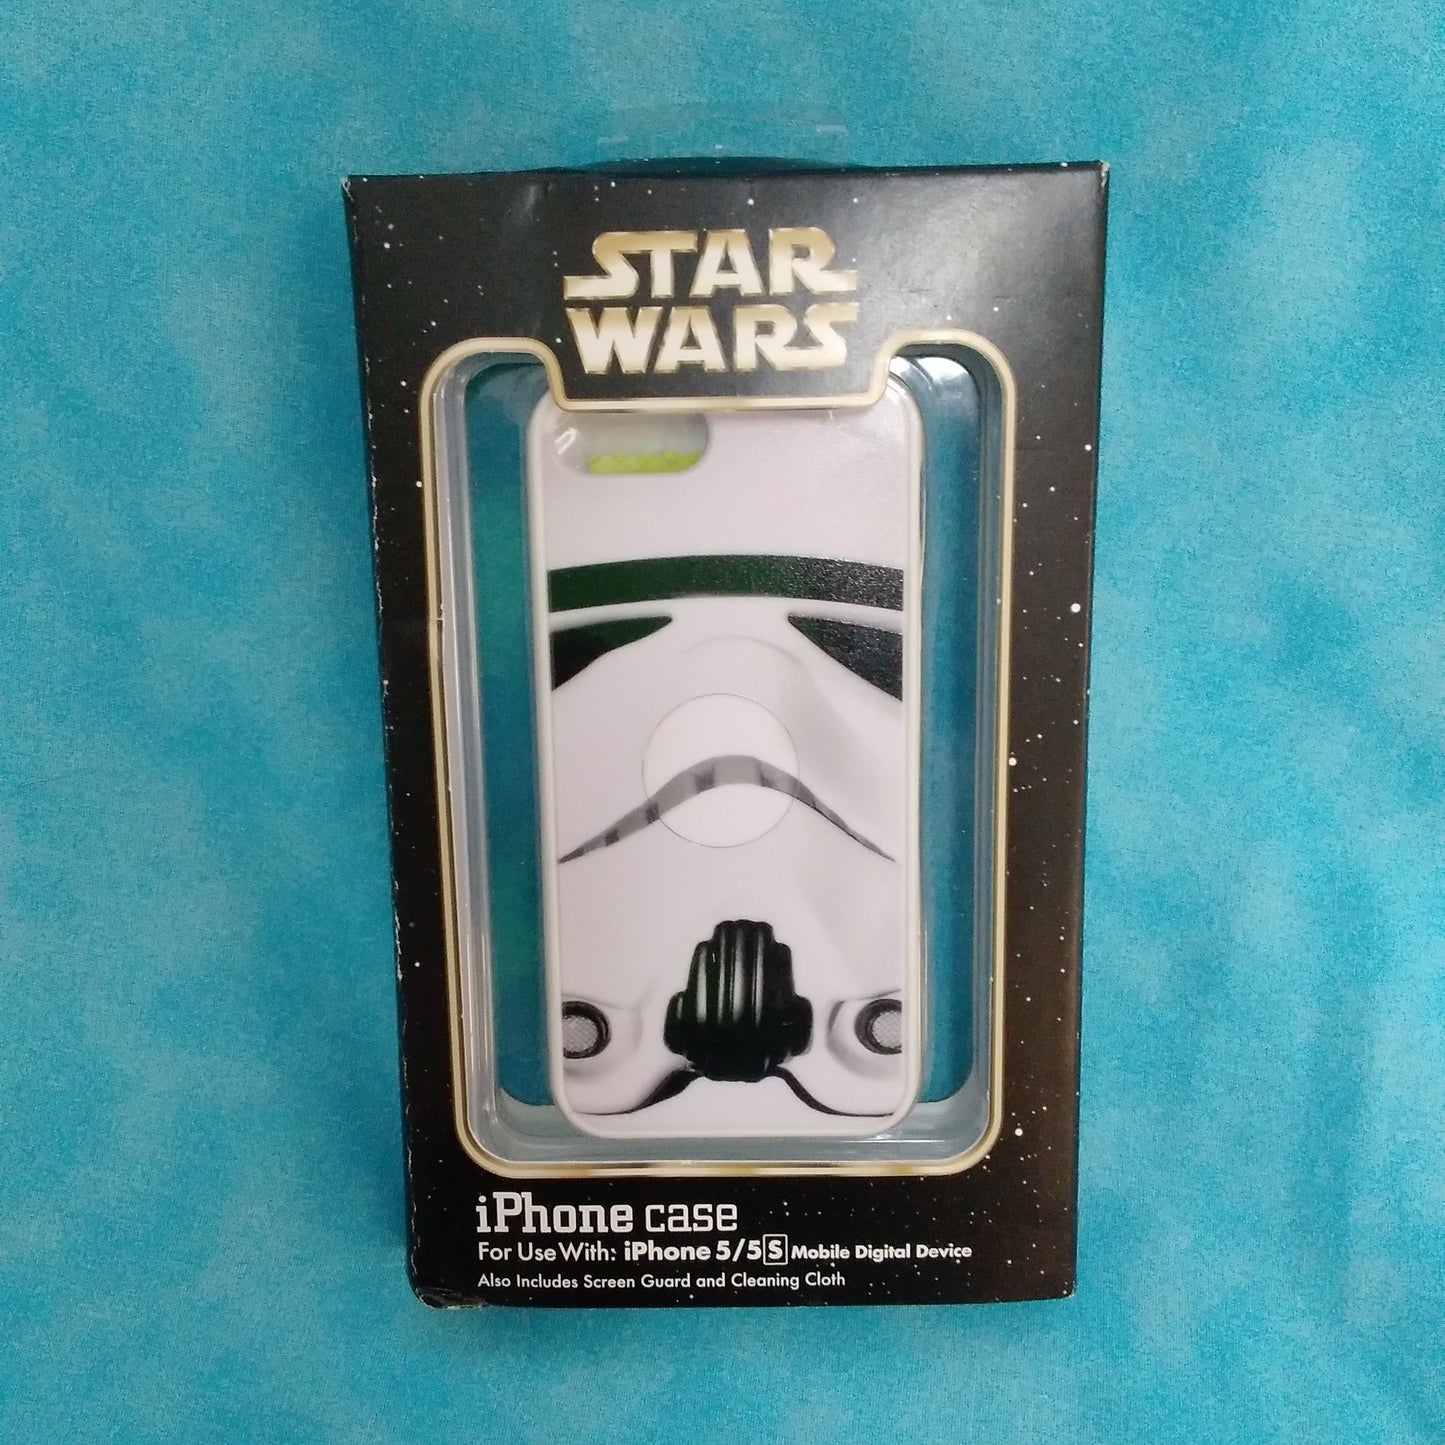 NIB - Disney Parks Star Wars iPhone Case - For use with: iPhone 5/5S